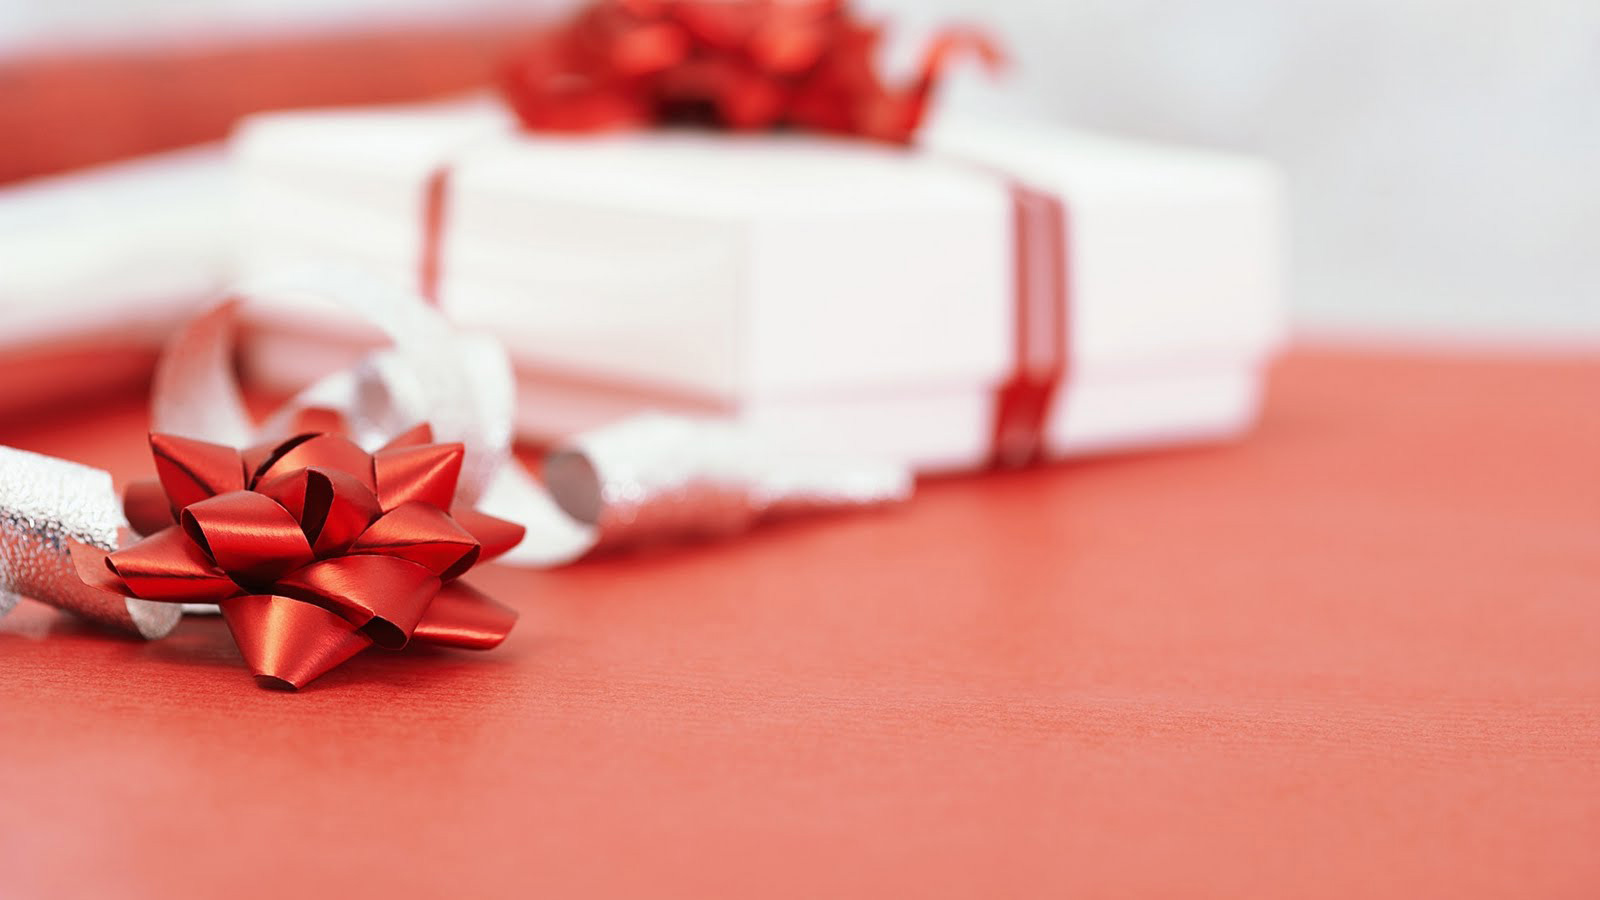 Gifts Background Images Hd - HD Wallpaper 